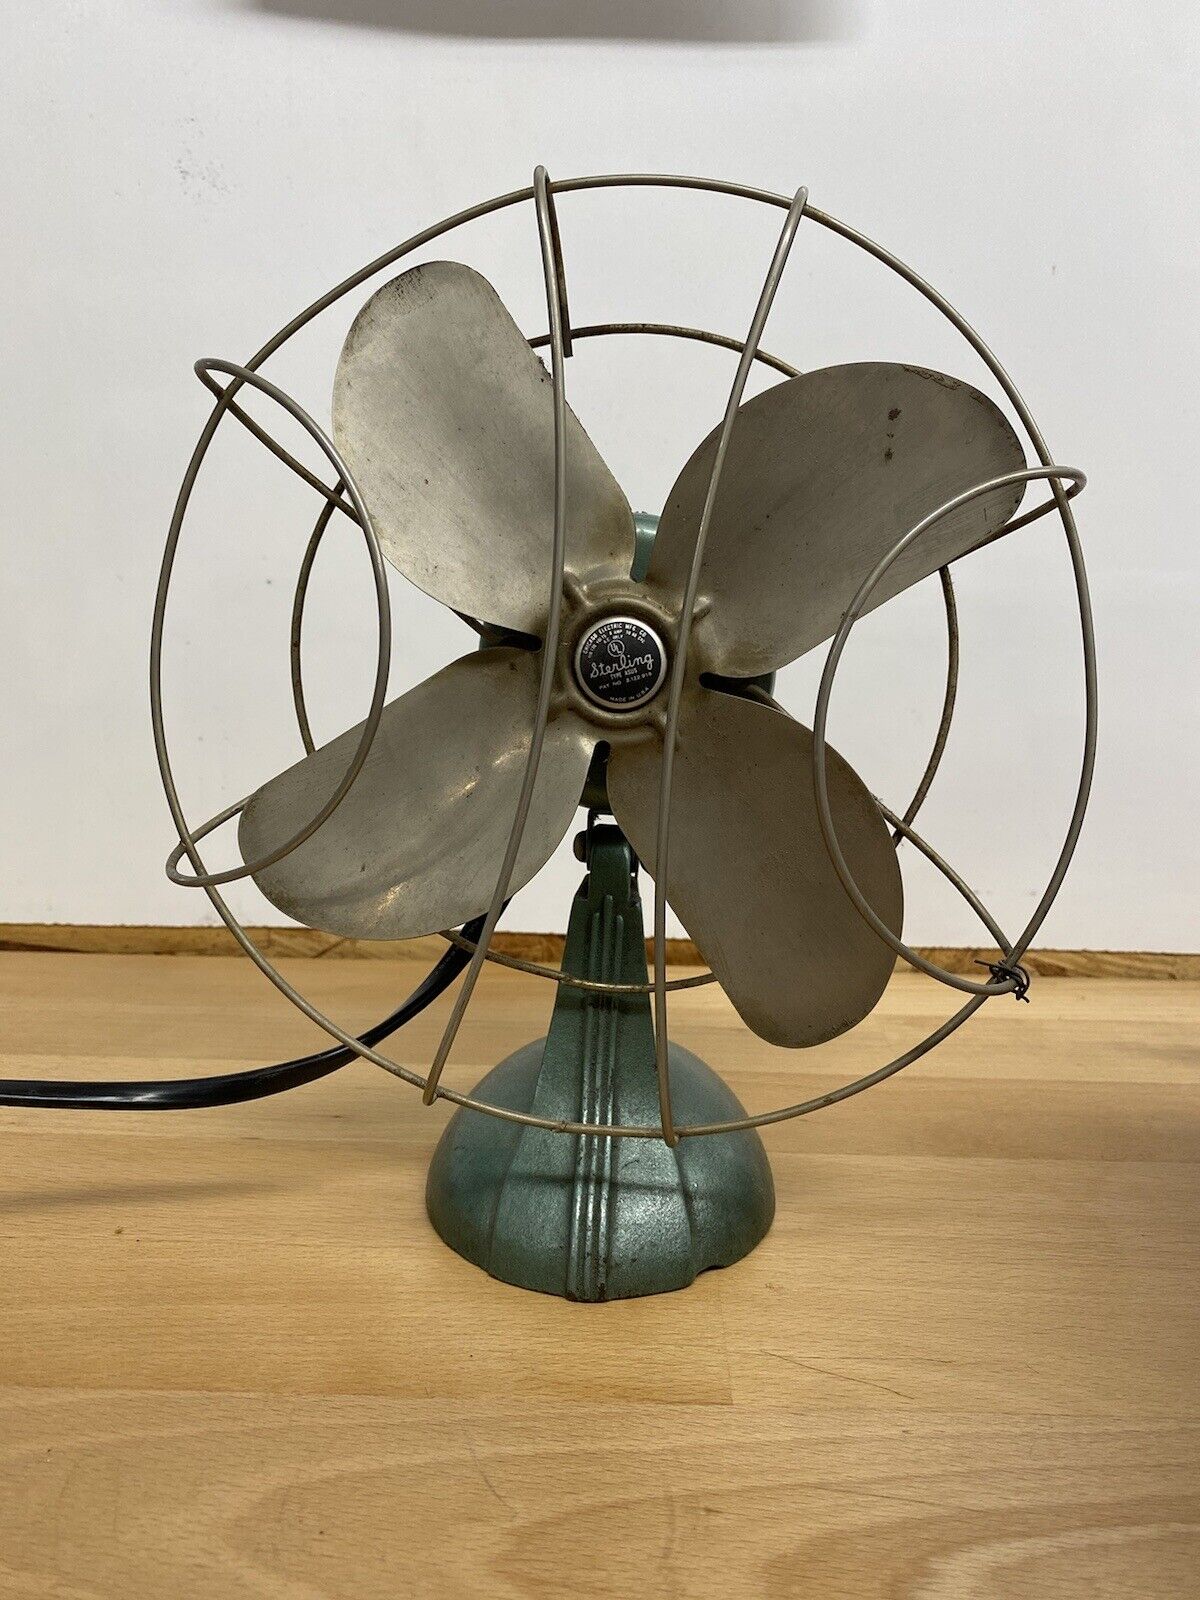 Antique Sterling Brand Desk Fan Made By Chicago Electric MFG. Company Circa 1940